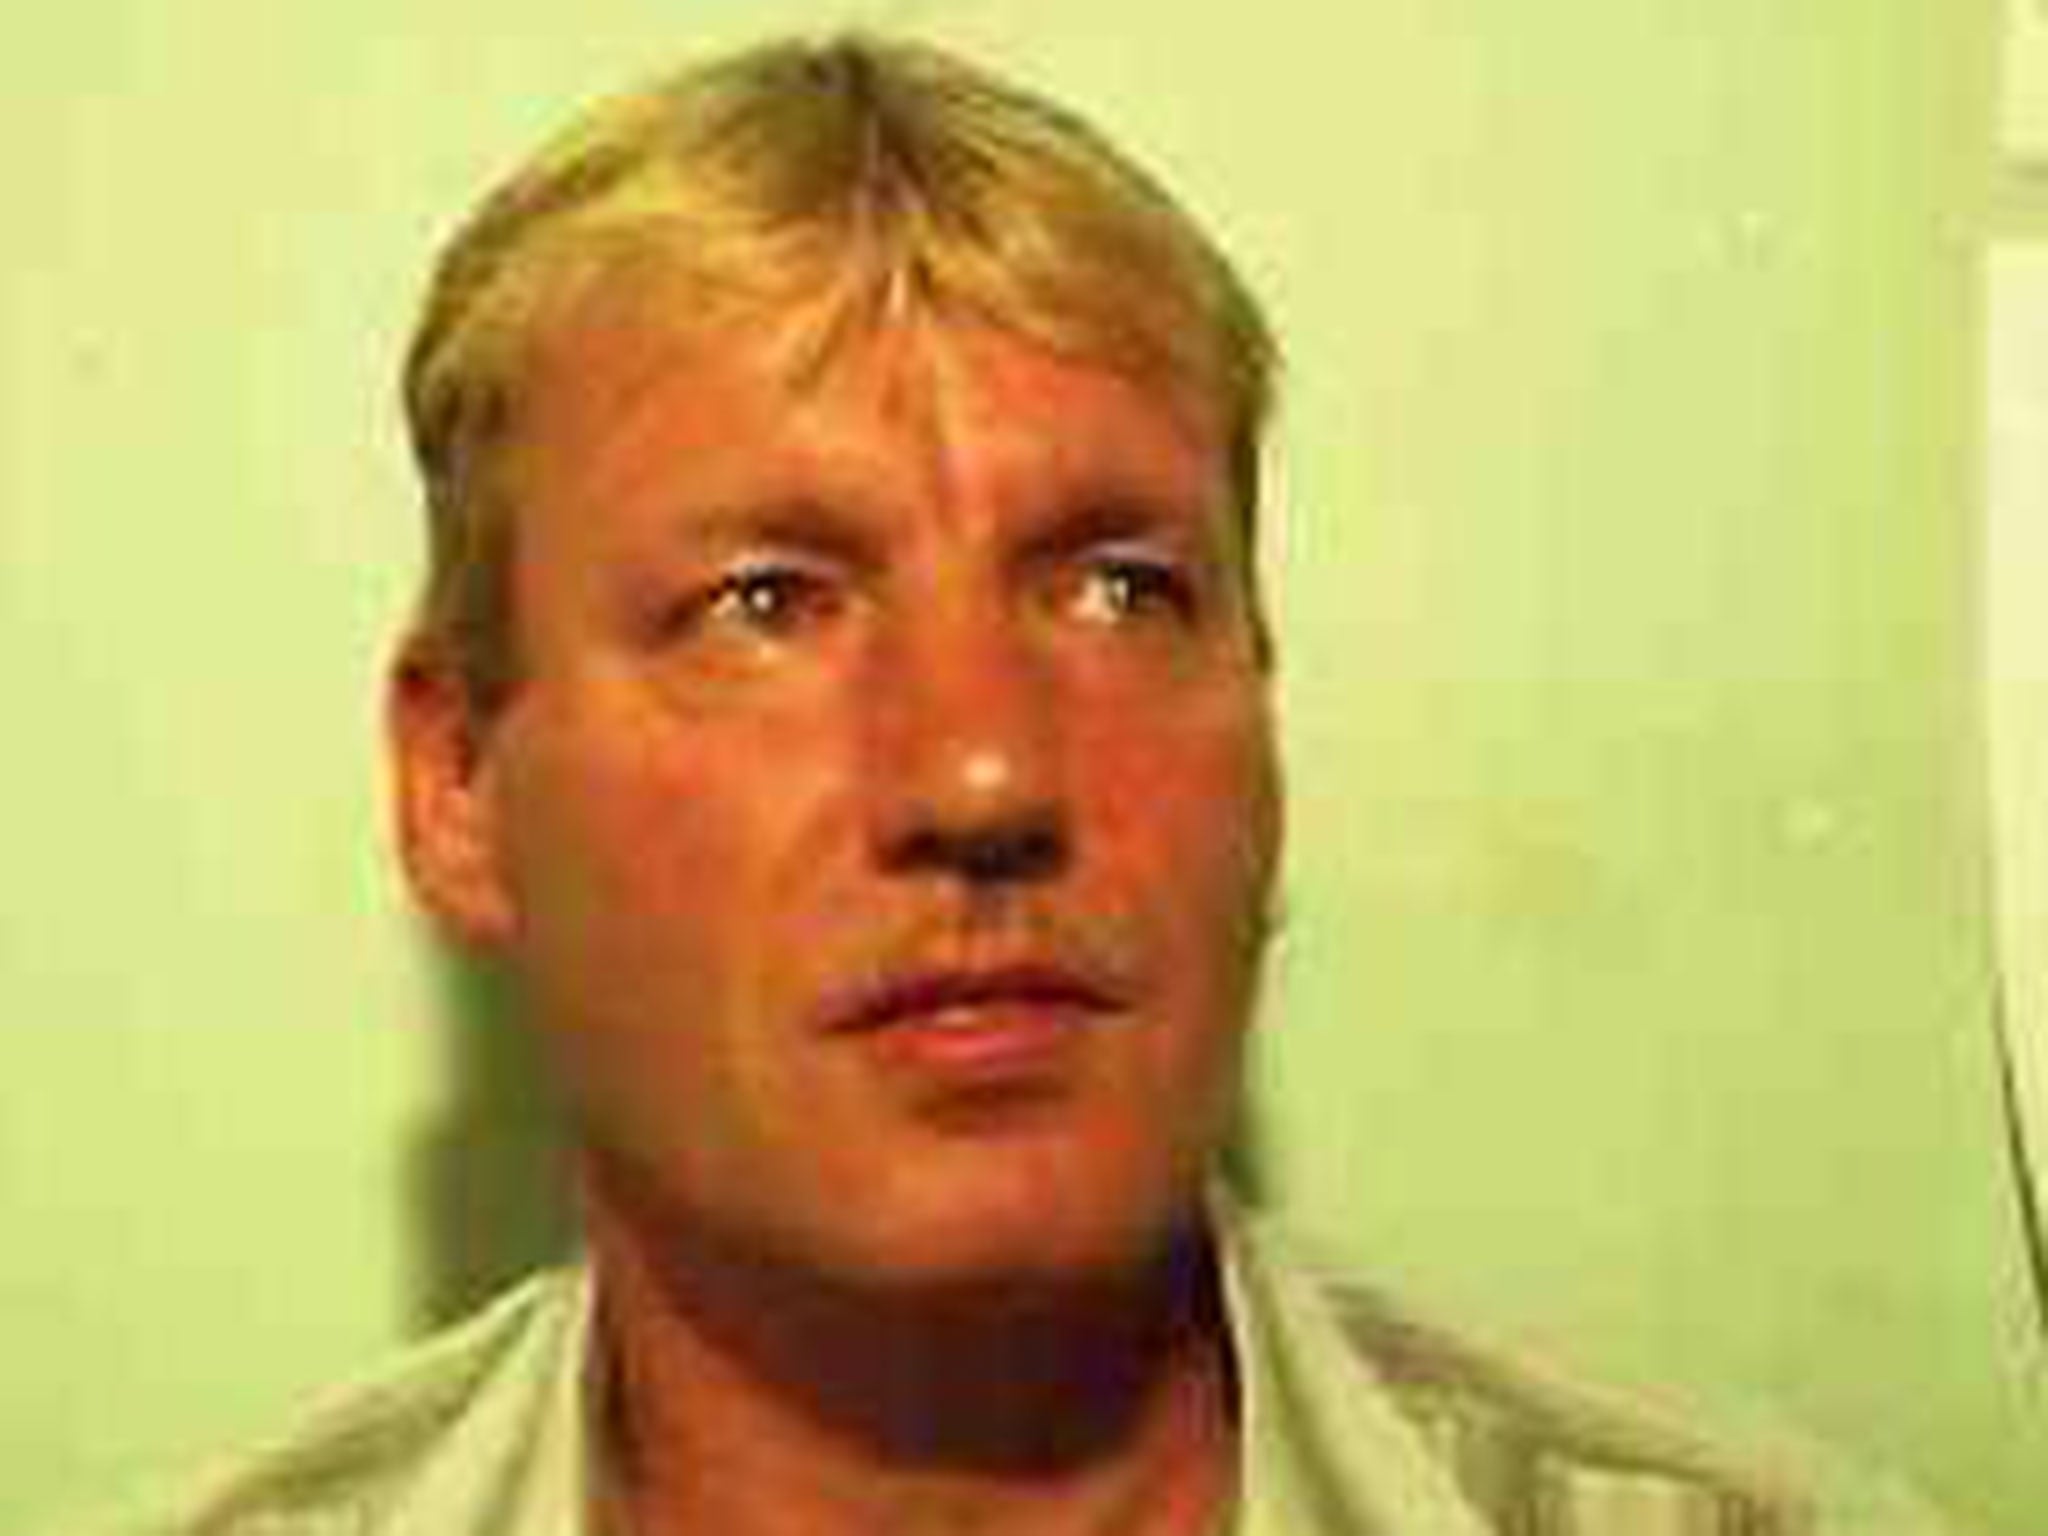 John Heald, 53, of South Yorkshire, is wanted by police in connection with the murder of a woman at a guest house.